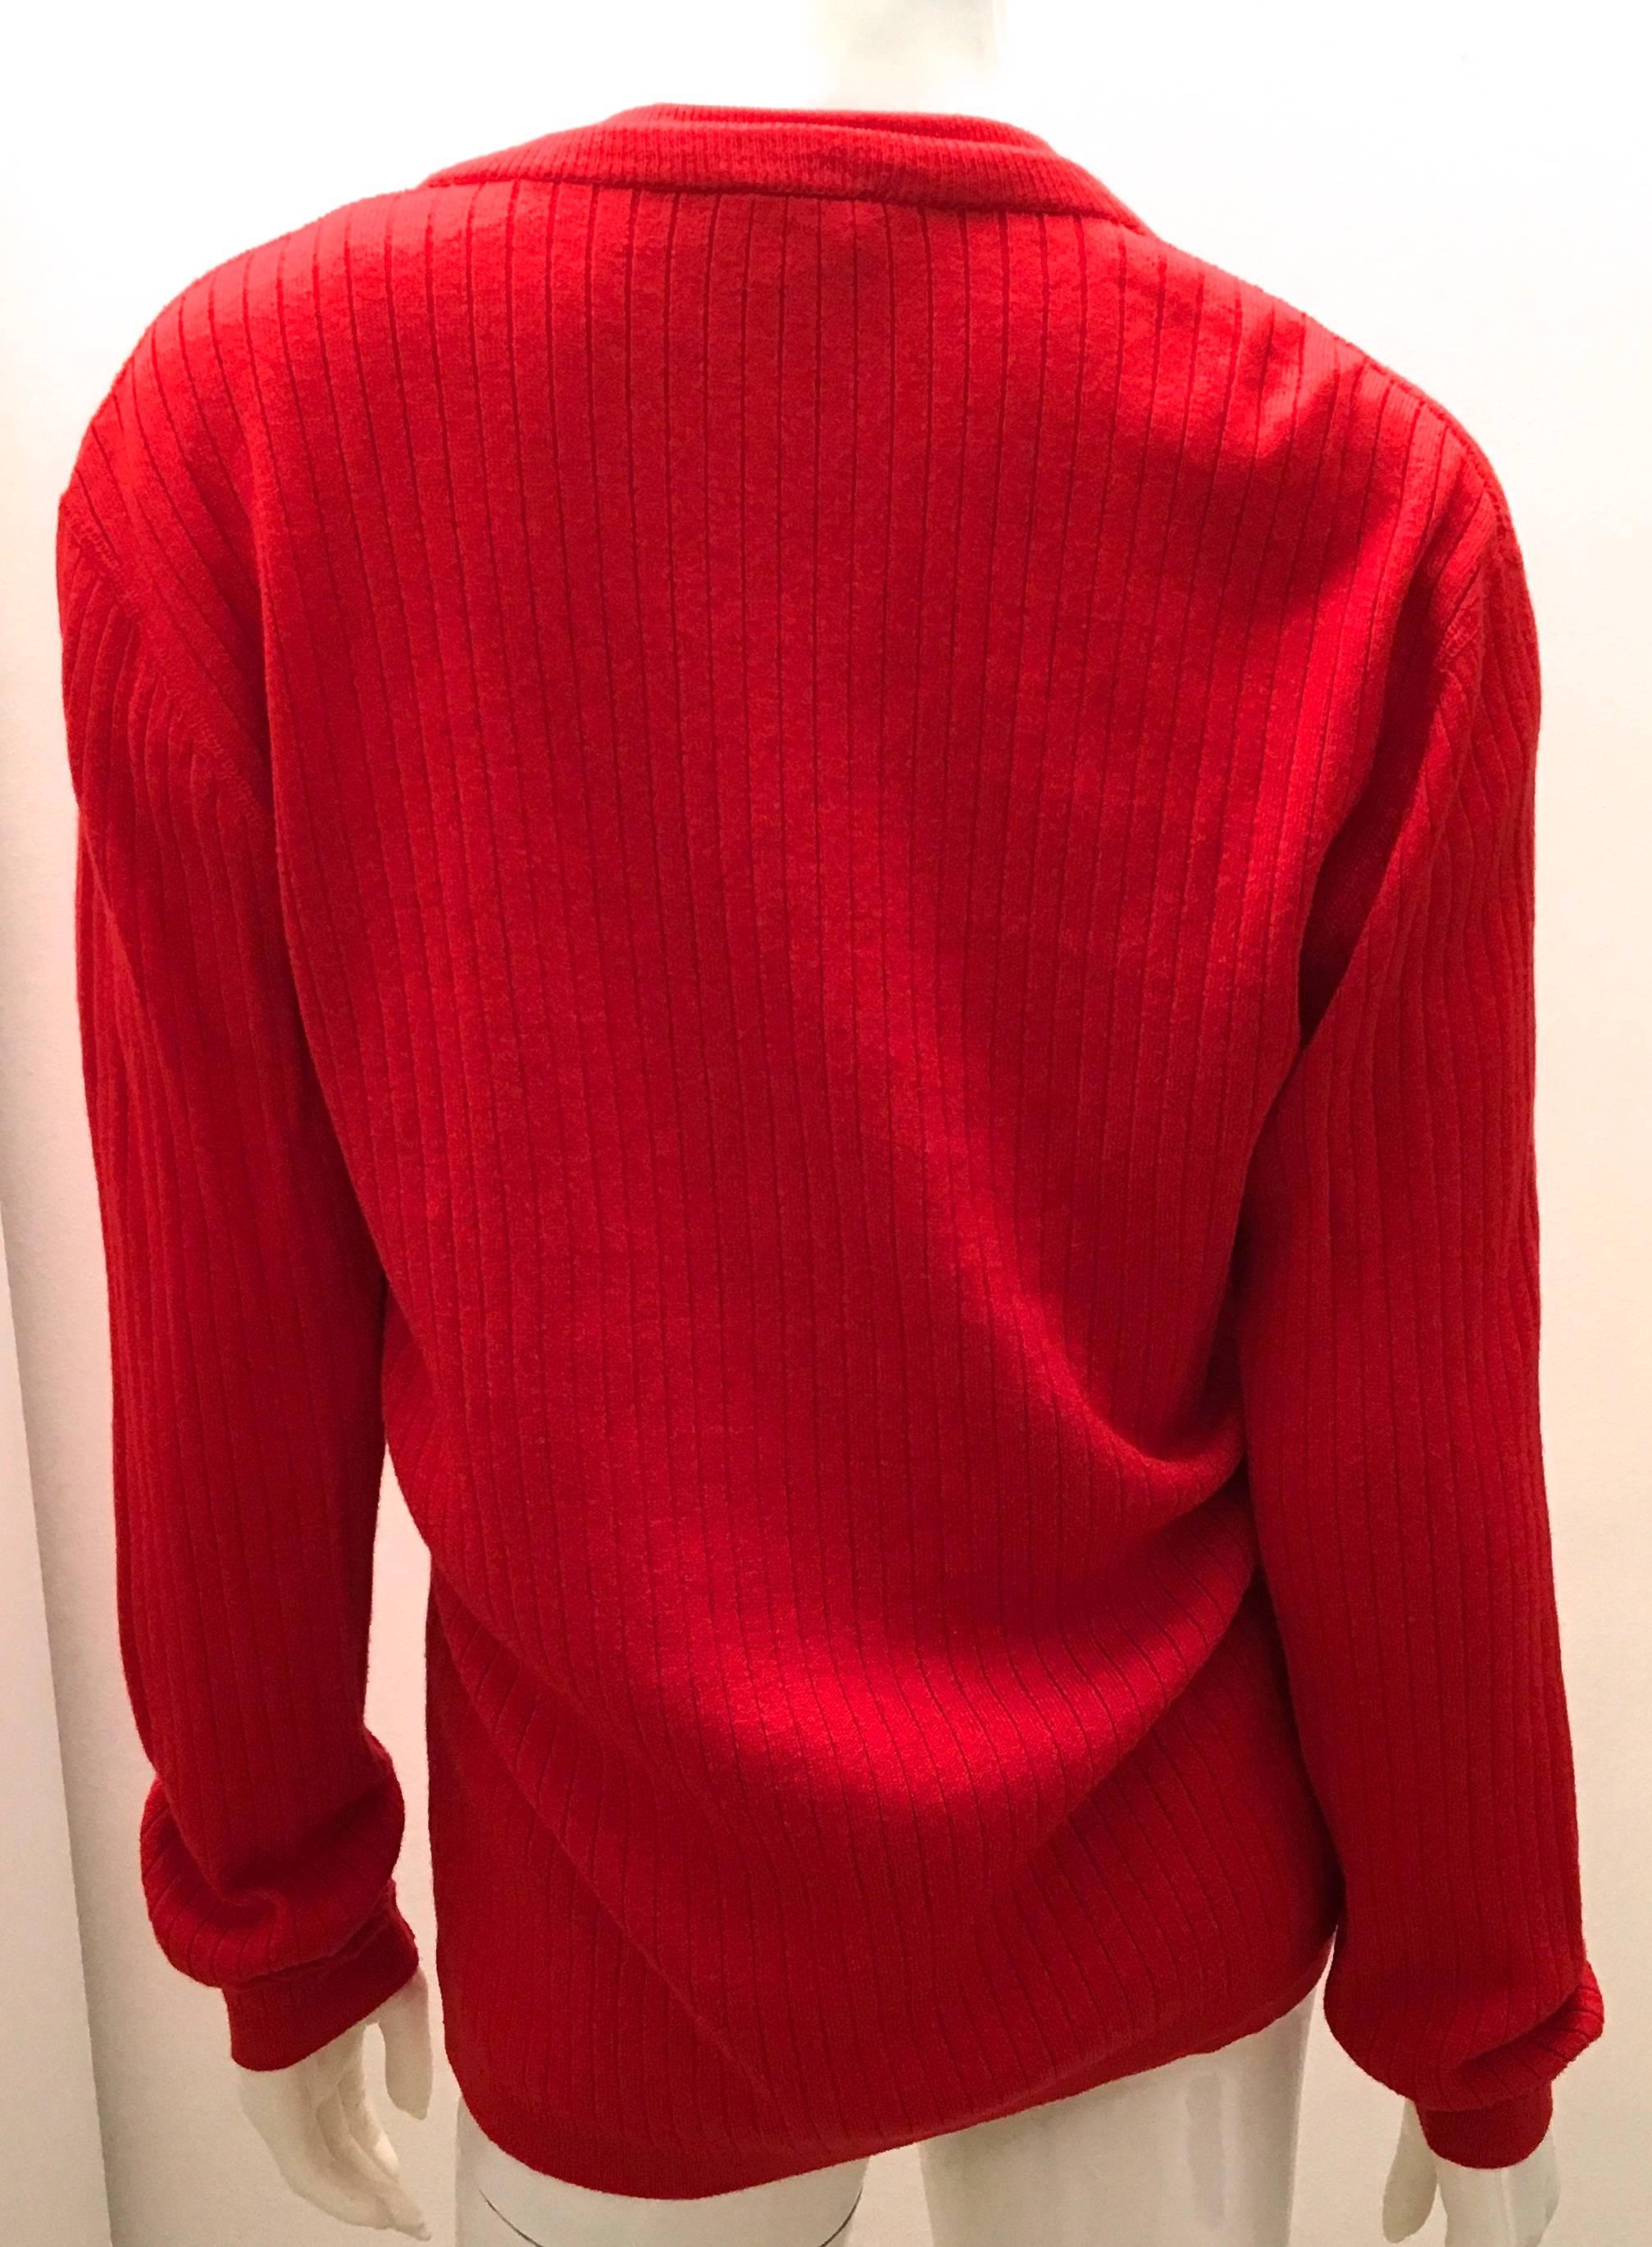 Rare Courreges Red Cardigan Sweater Set - 1970's In Excellent Condition For Sale In Boca Raton, FL